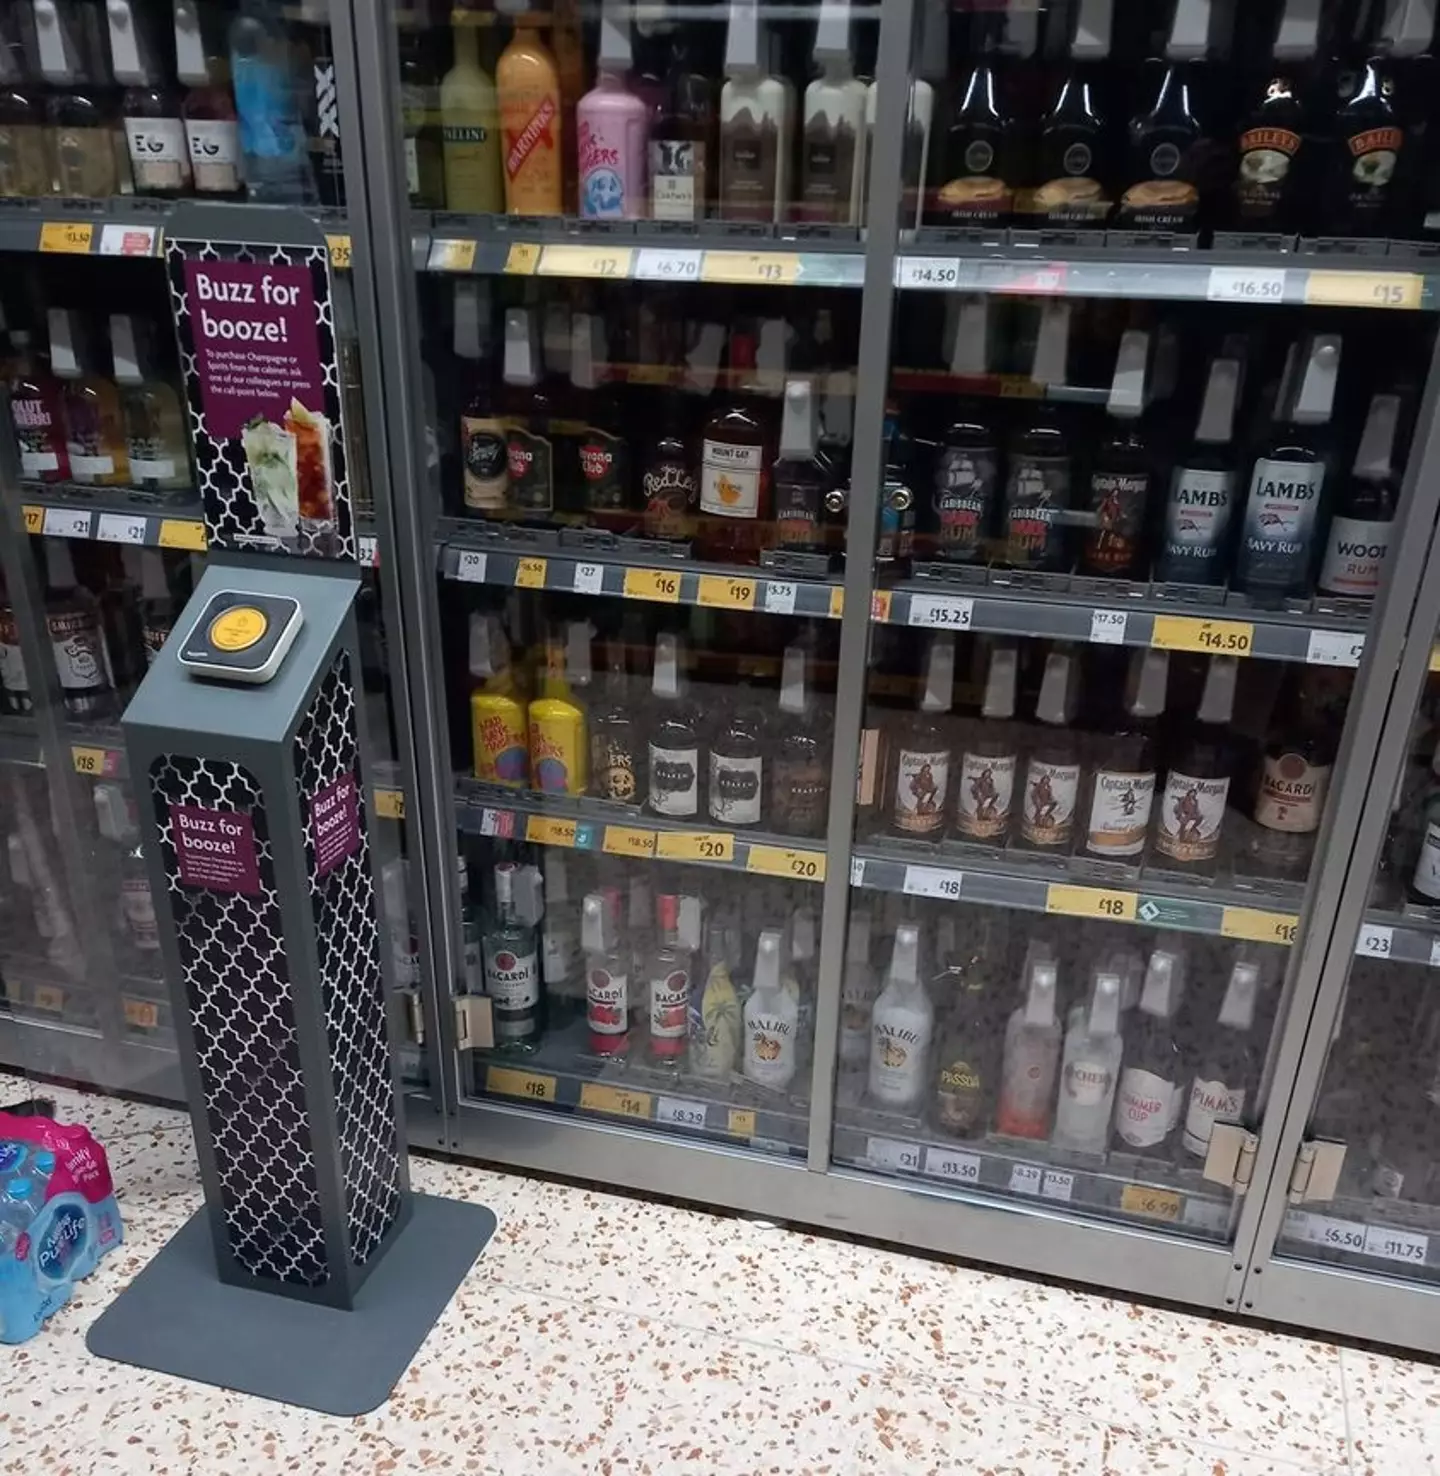 One Morrisons store has introduced a 'Buzz for Booze' system for customers who want to purchase alcohol.